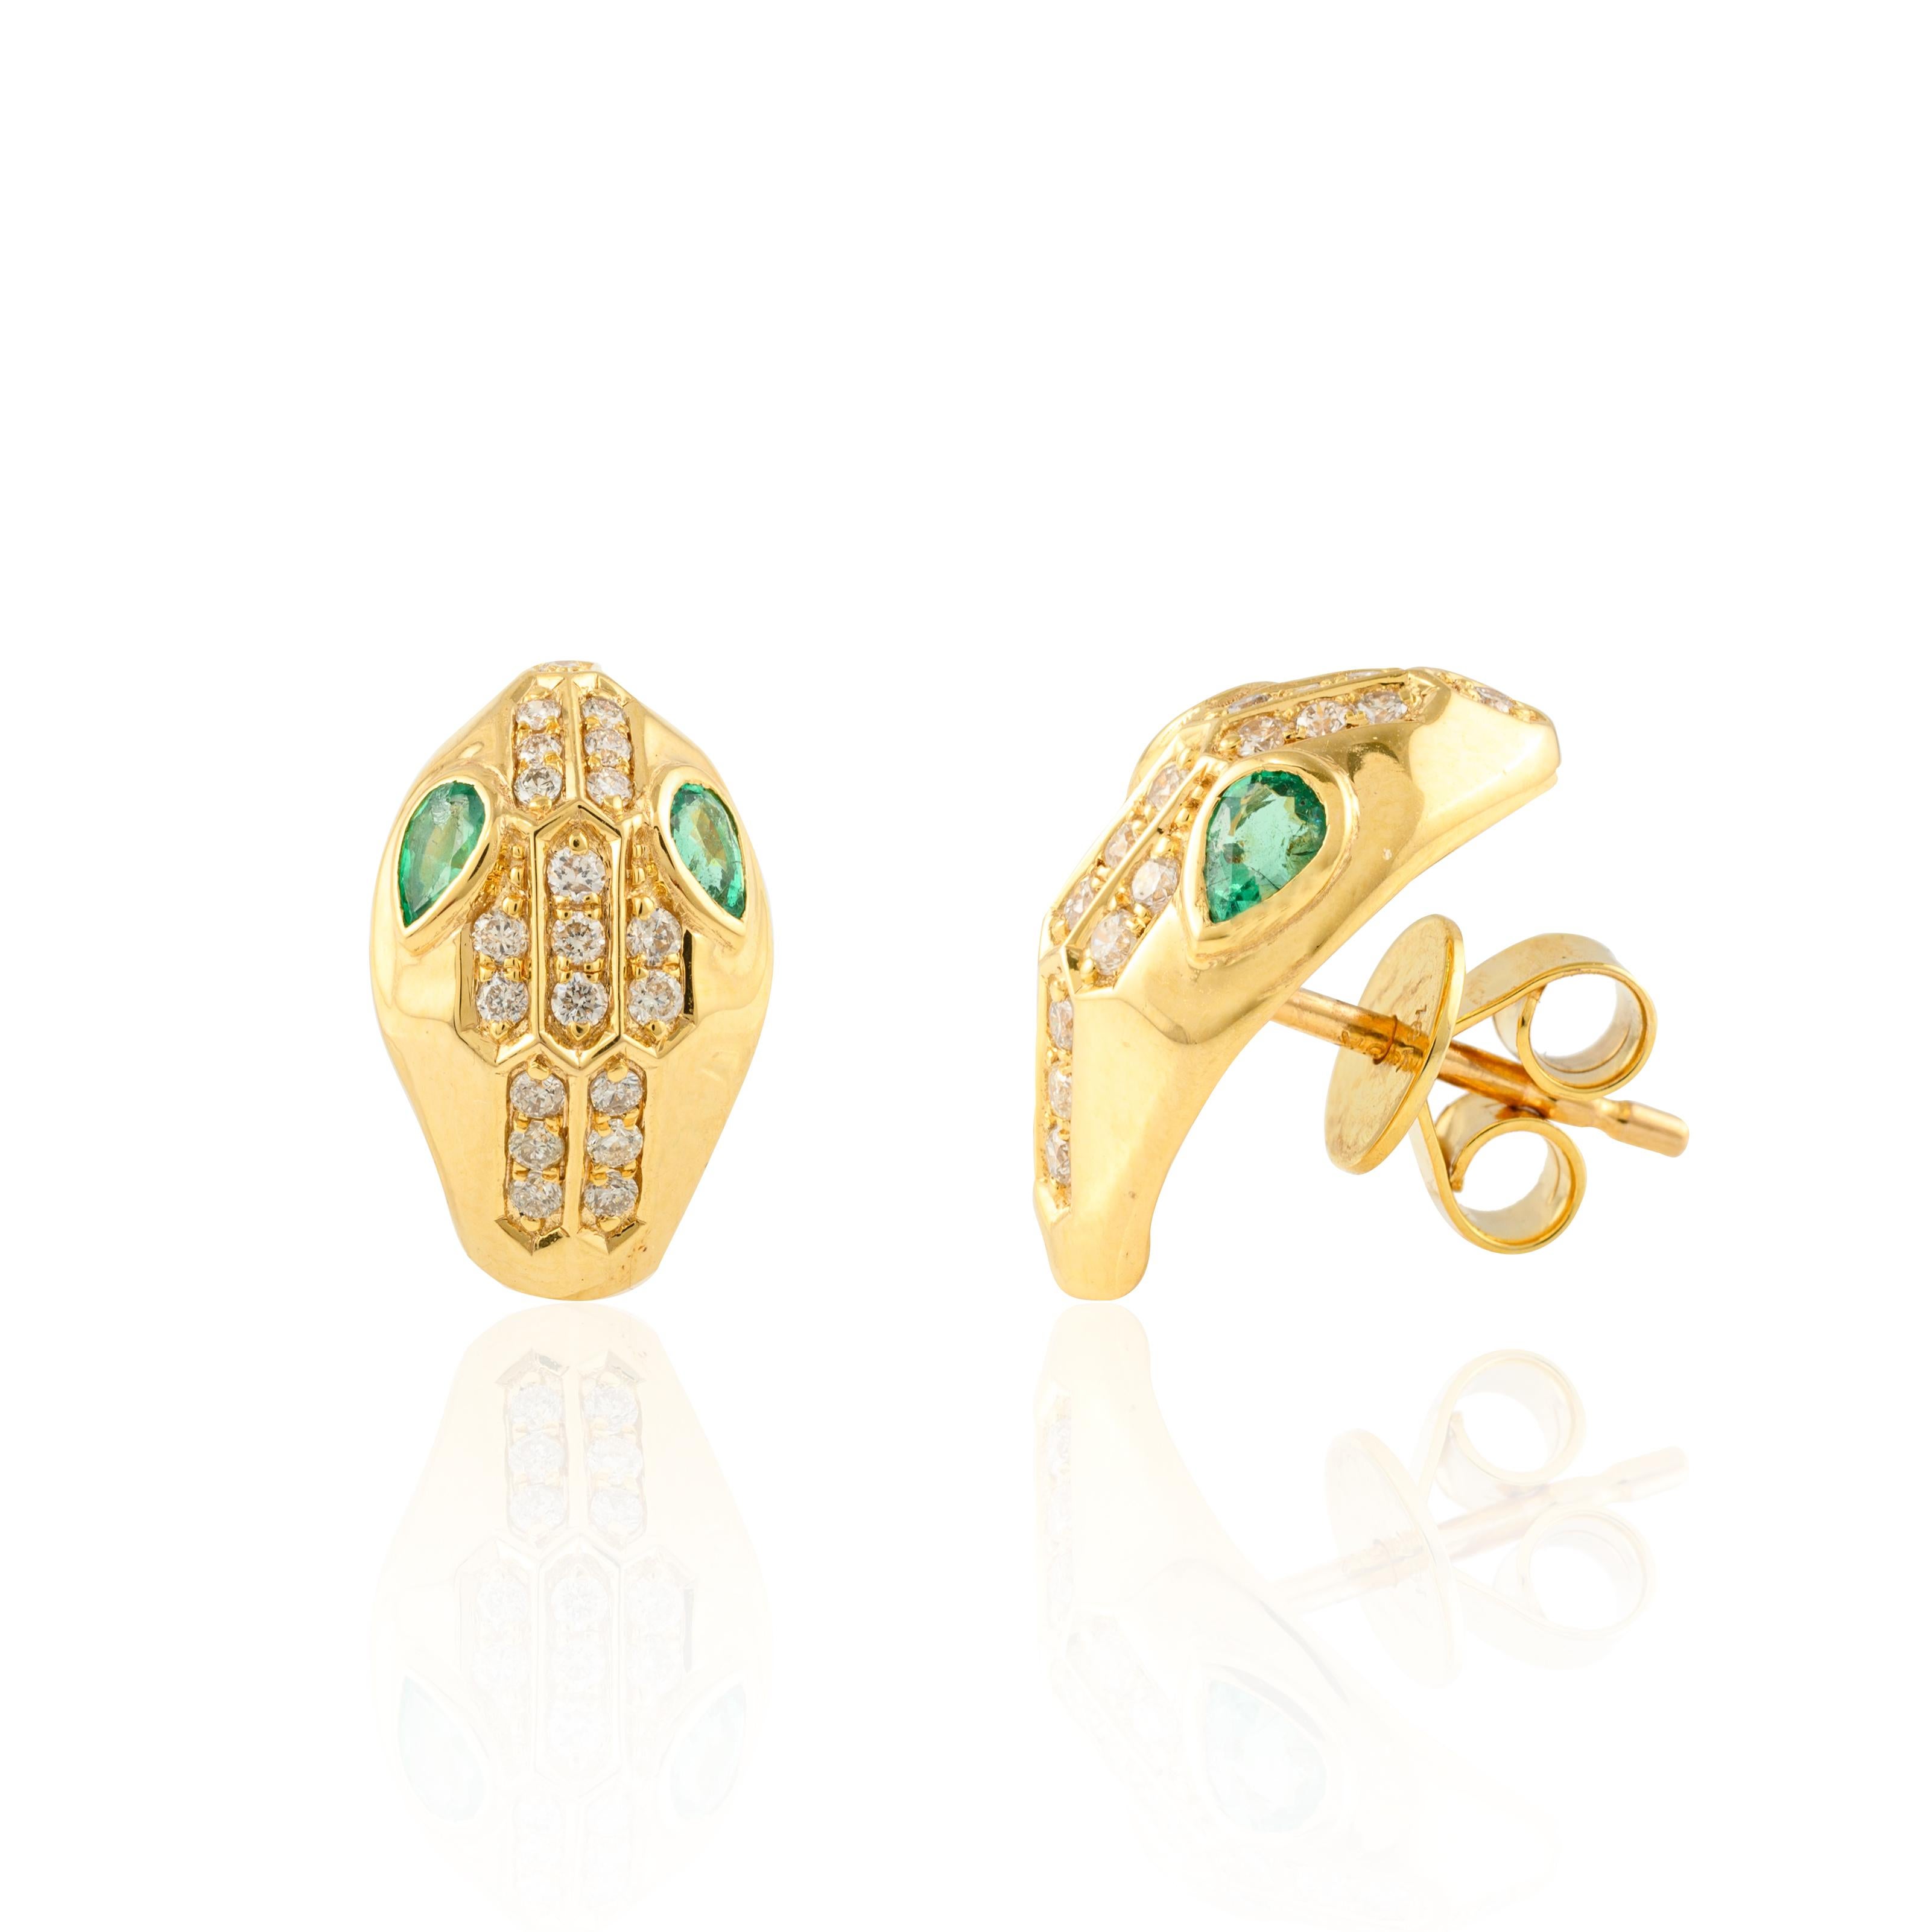 Emerald Diamond Serpentine Pushback Stud Earrings in 18K Gold with Diamonds to make a statement with your look. These earrings create a sparkling, luxurious look featuring pear cut emerald .
Emerald enhances the intellectual capacity.
Designed with